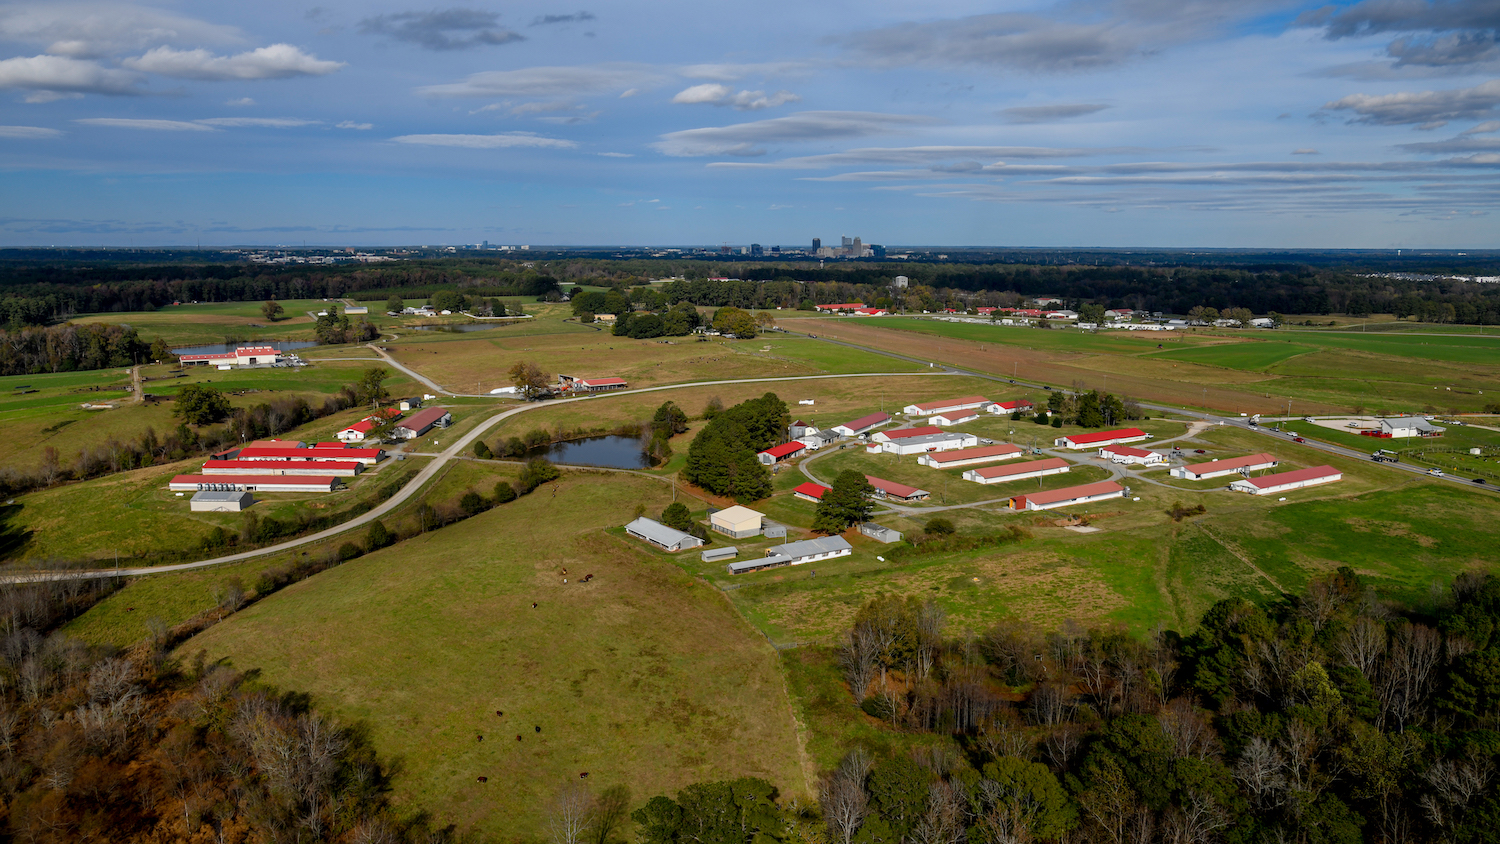 aerial view of the Lake Wheeler Road Field Laboratory